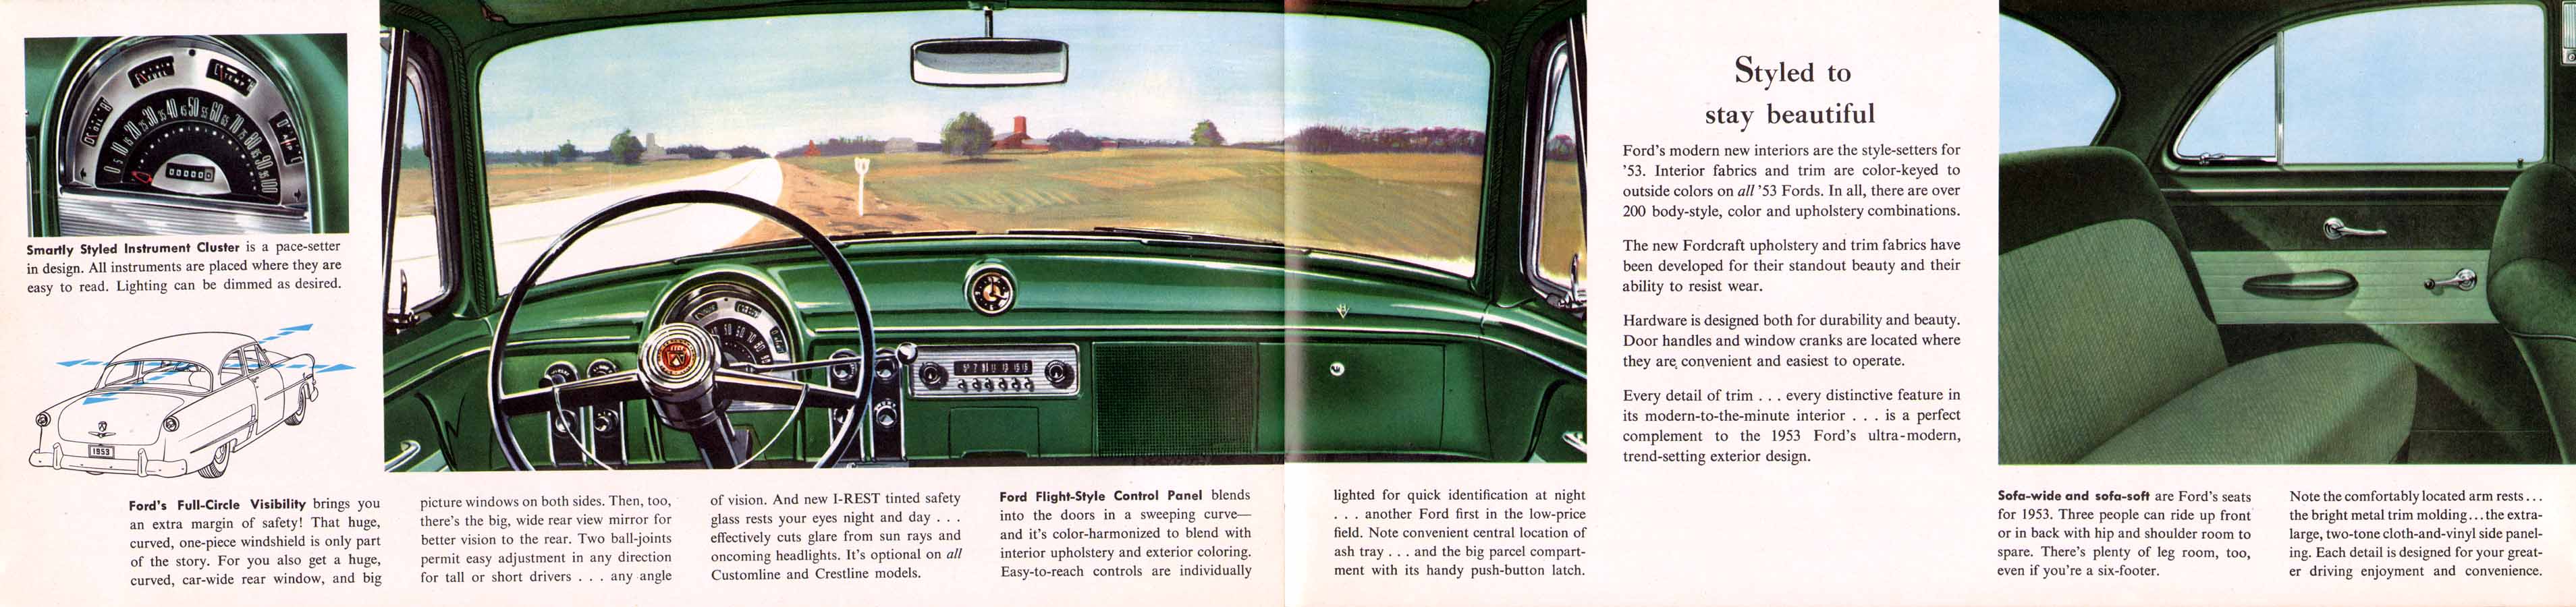 1953 Ford Brochure Page 16